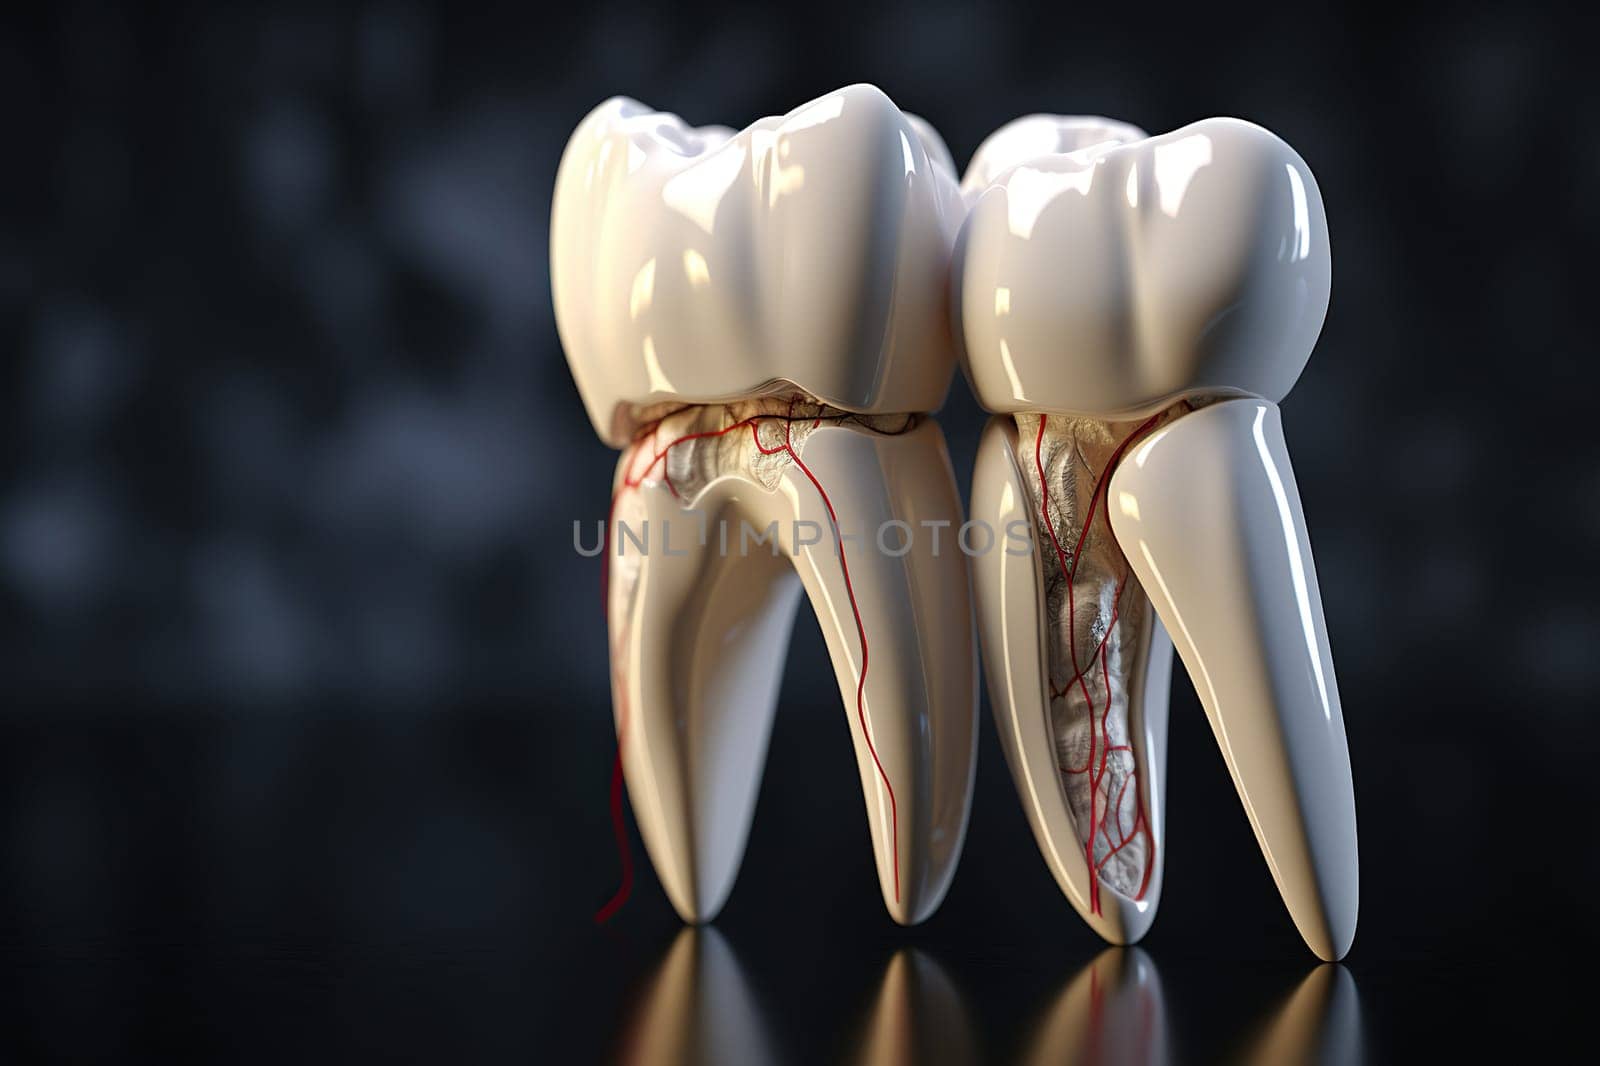 3D model of teeth. Model of a tooth with caries on a dark background.